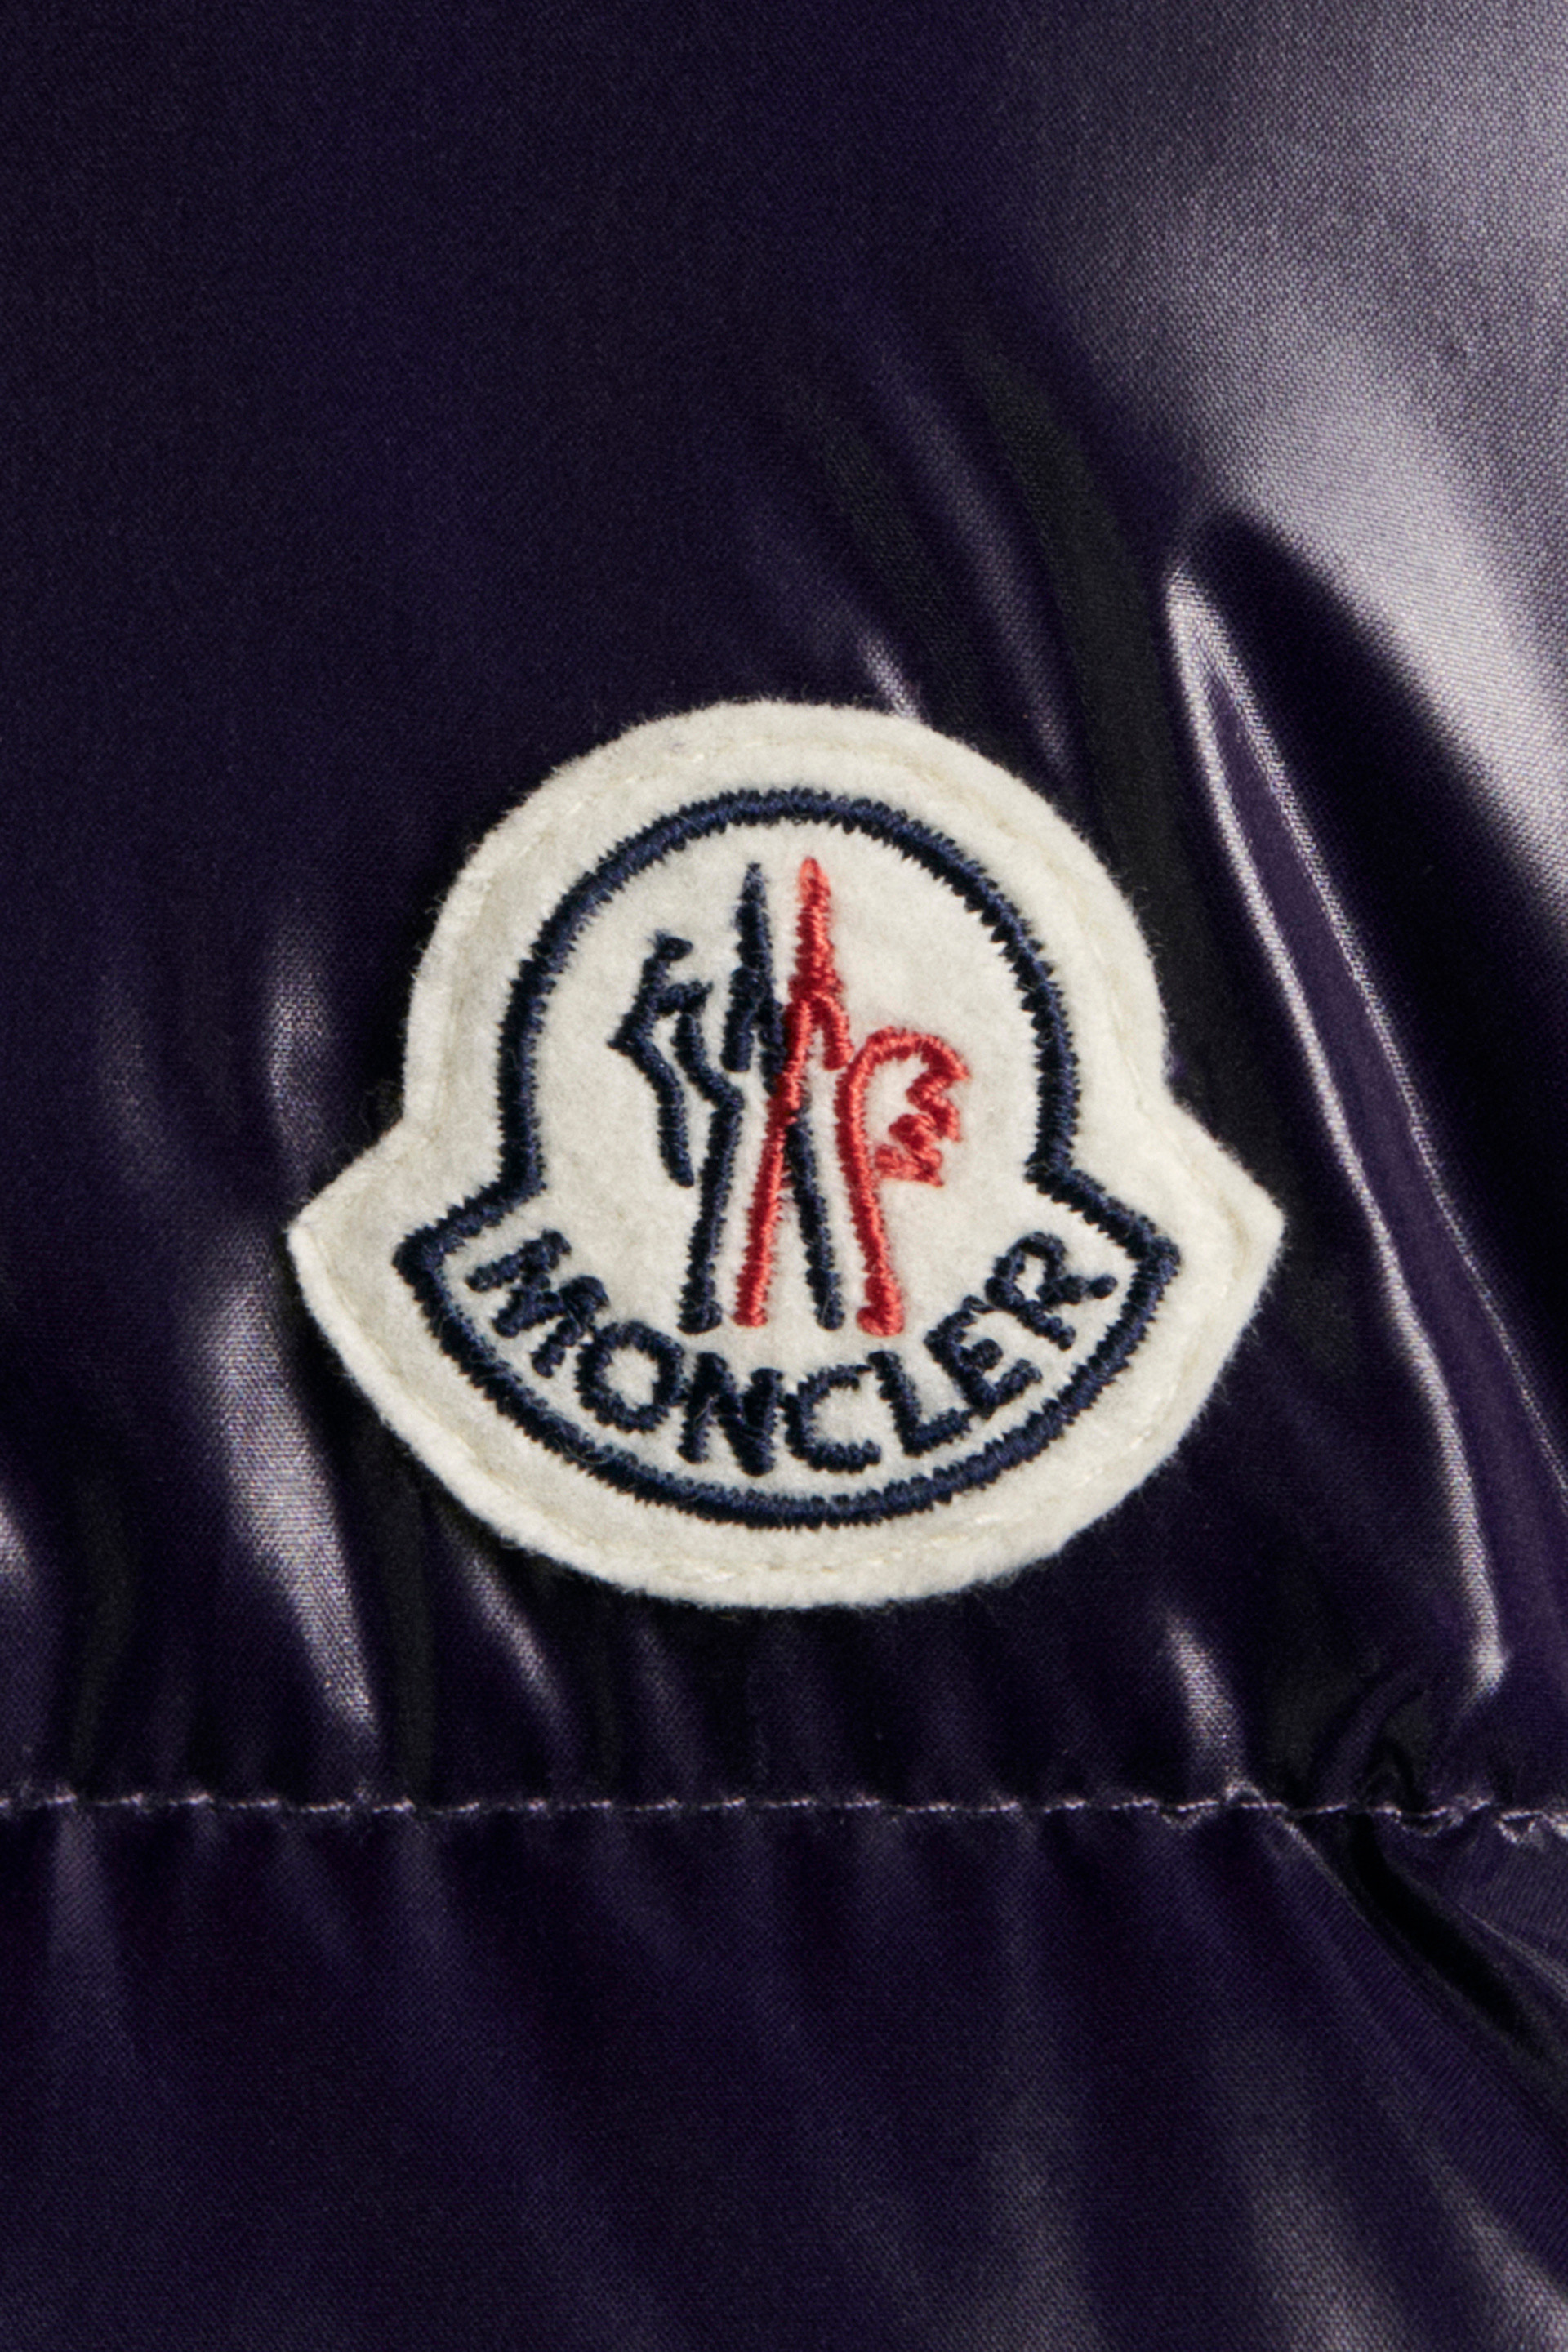 moncler logo,Save up to 19%,www.ilcascinone.com